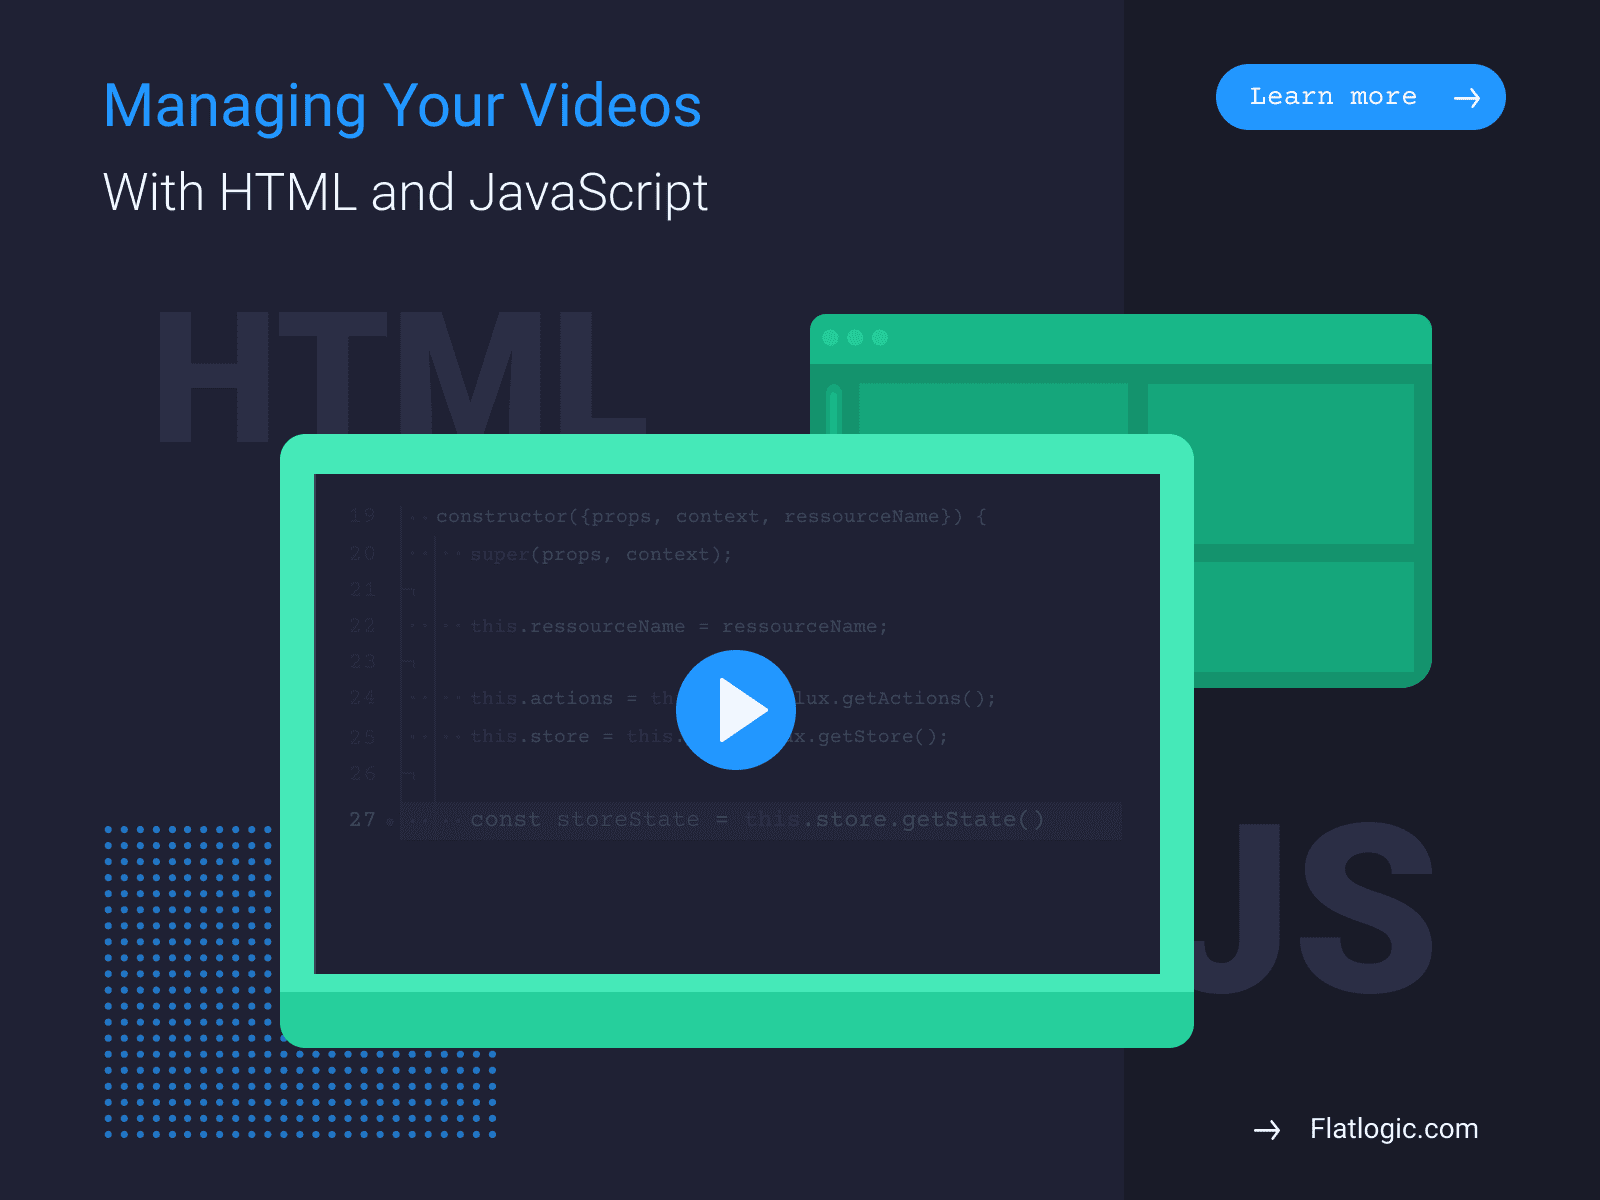 Using HTML and JavaScript to Manipulate Videos